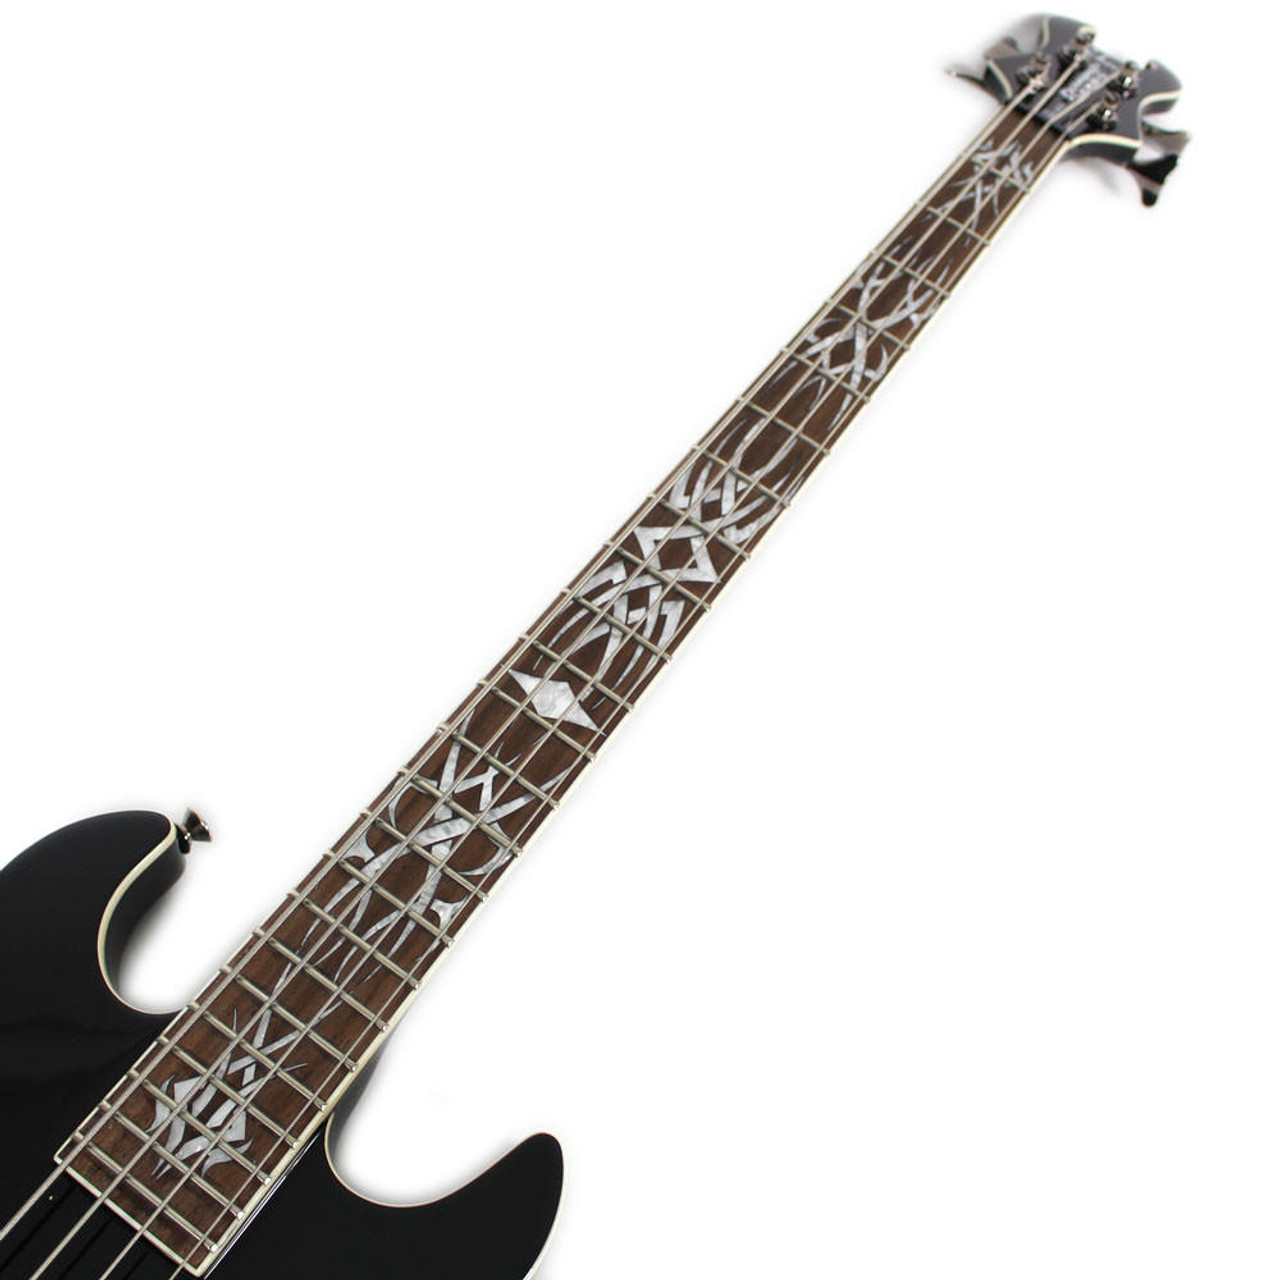 Used Schecter Diamond Series Devil Tribal Electric Bass Guitar in Black  Finish